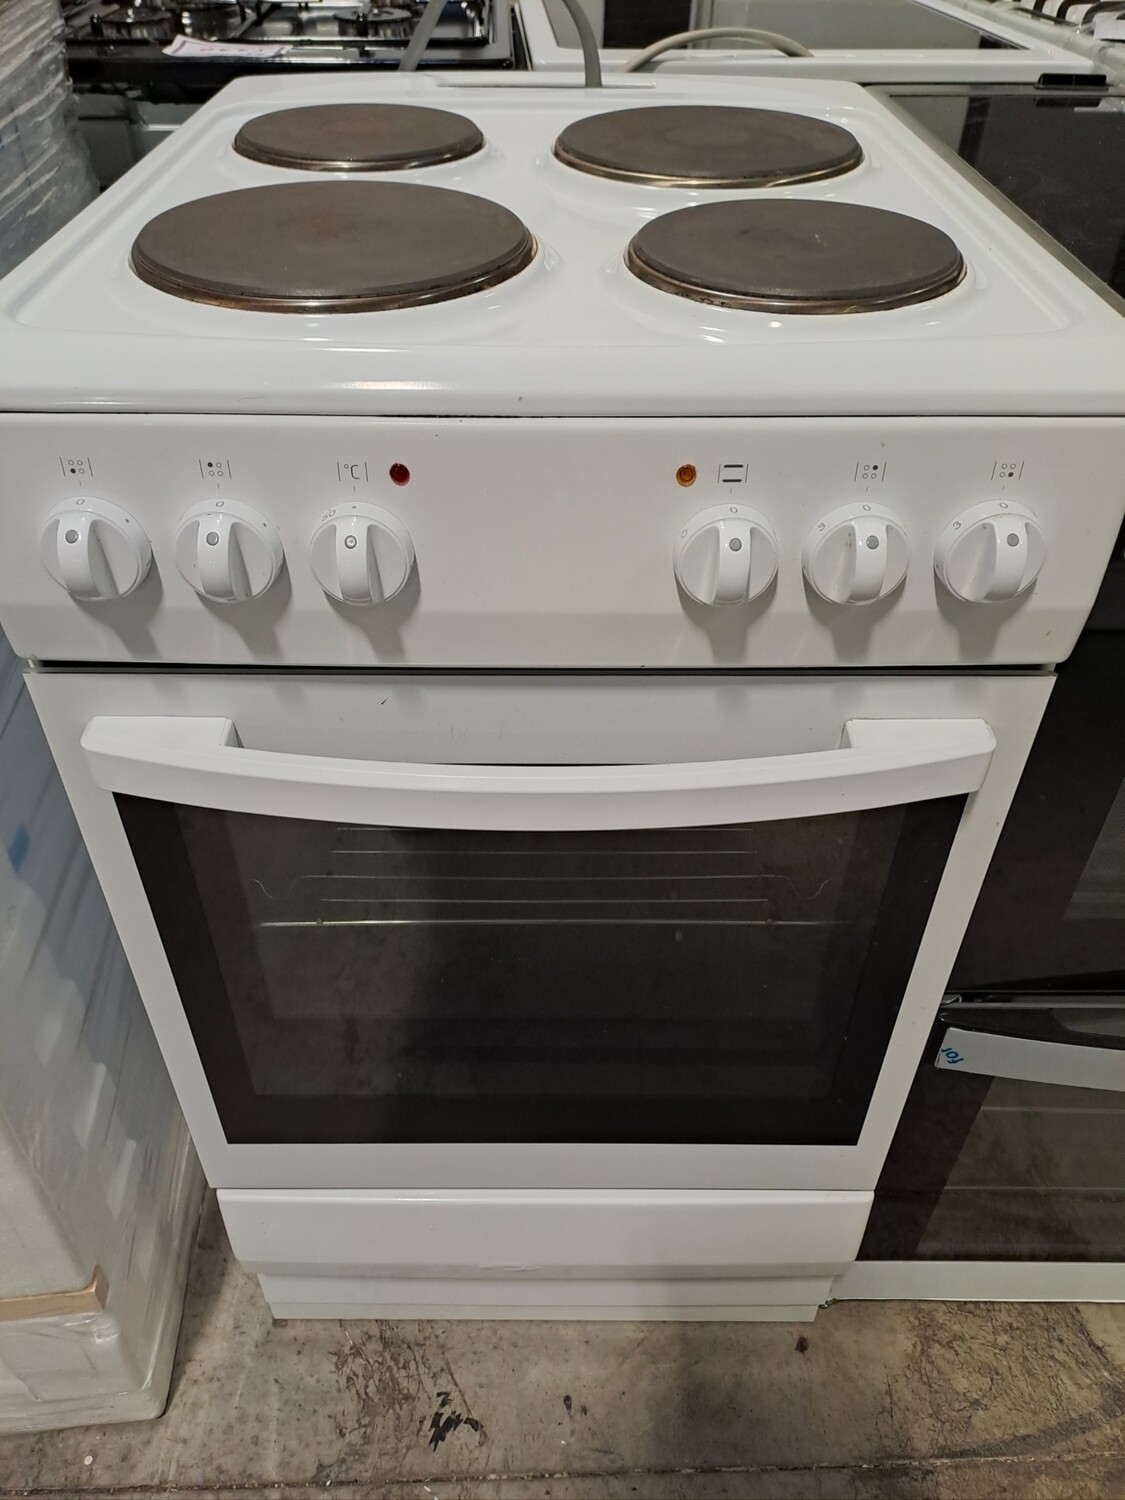 Essentials CFSEWH17 50cm Electric Cooker Solid Hobs White  - Refurbished + 6 month guarantee. This item is located in our Whitby Road Shop 